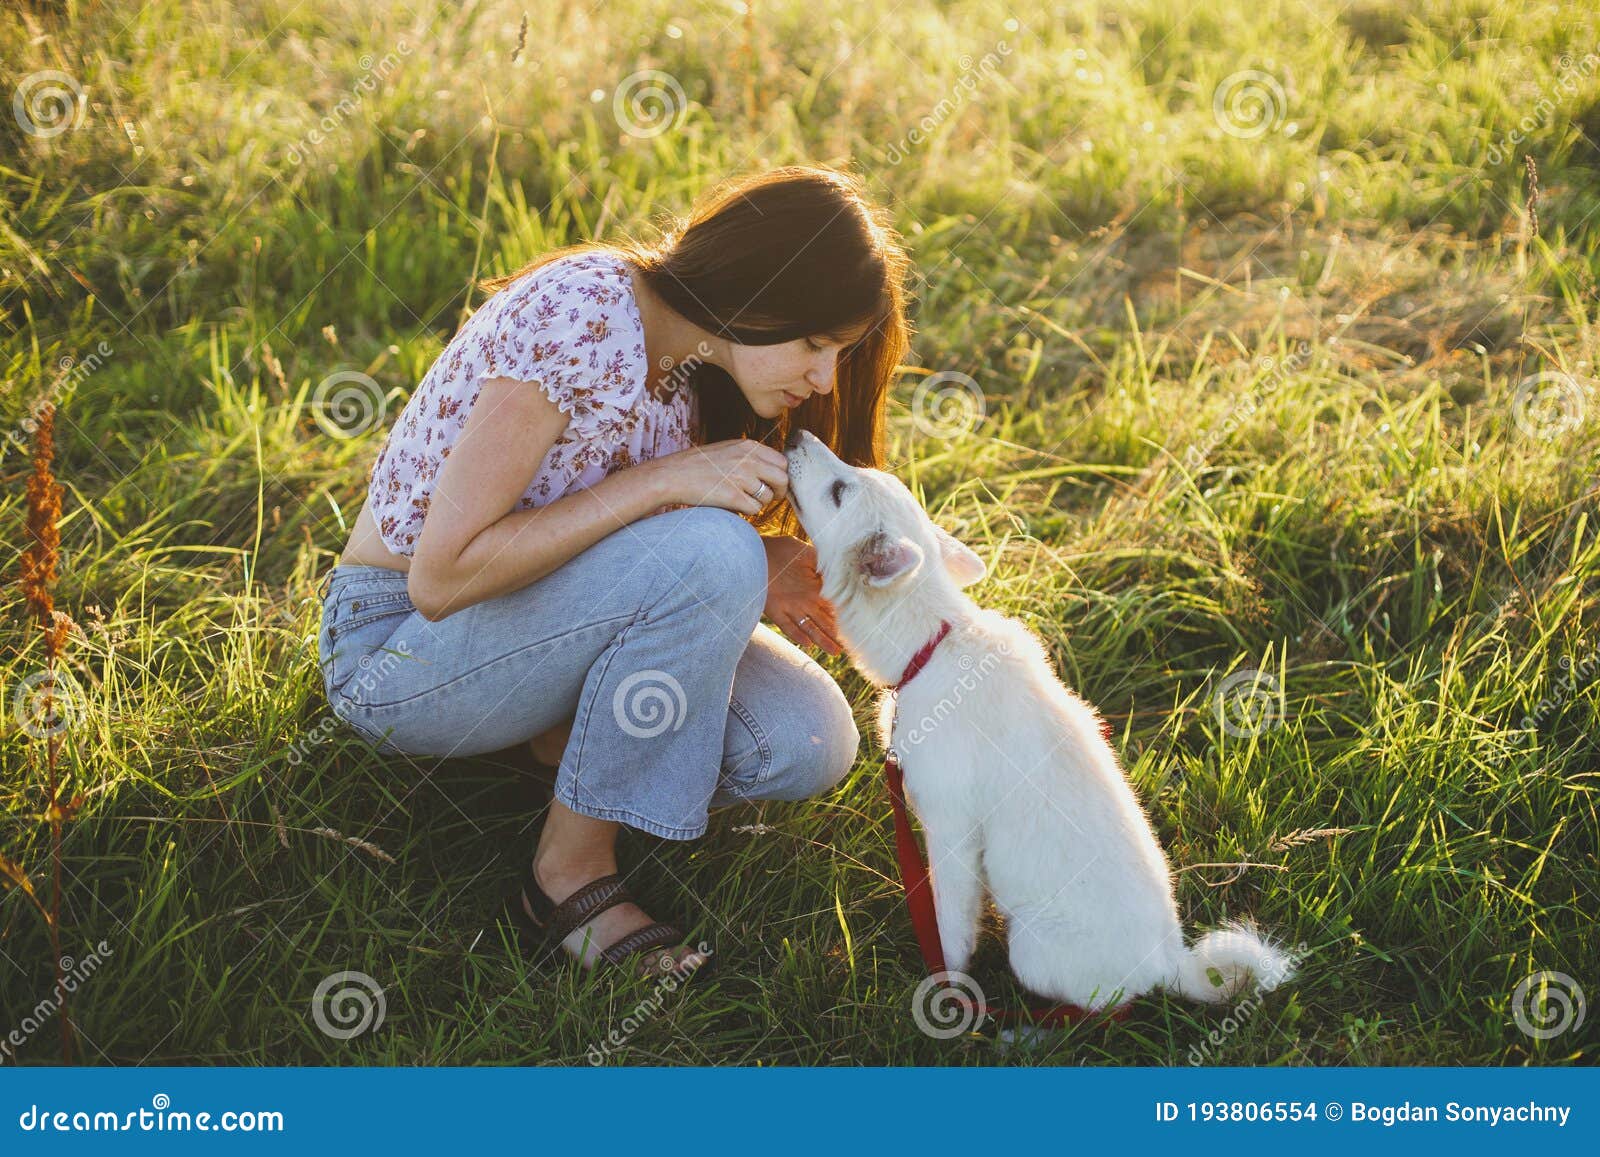 woman training cute white puppy to behave and caressing him in summer meadow in warm sunset light. adorable fluffy puppy  kissing